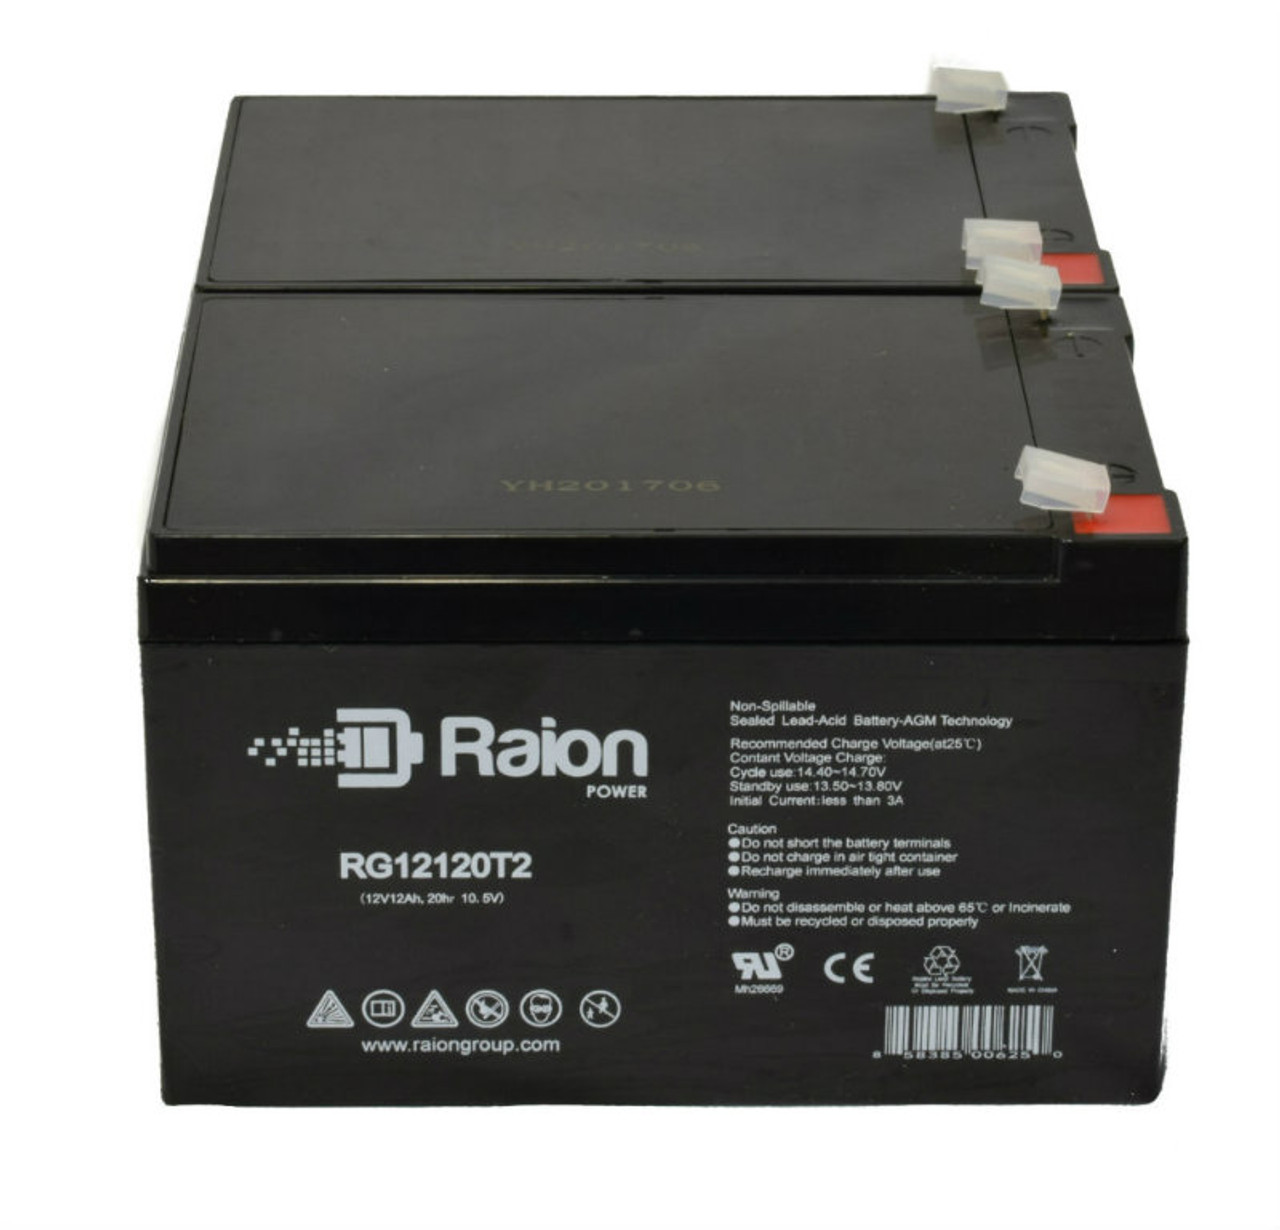 Raion Power 12V 12Ah Non-Spillable Compatible Replacement Battery for Kaiying KS10-12 - (2 Pack)